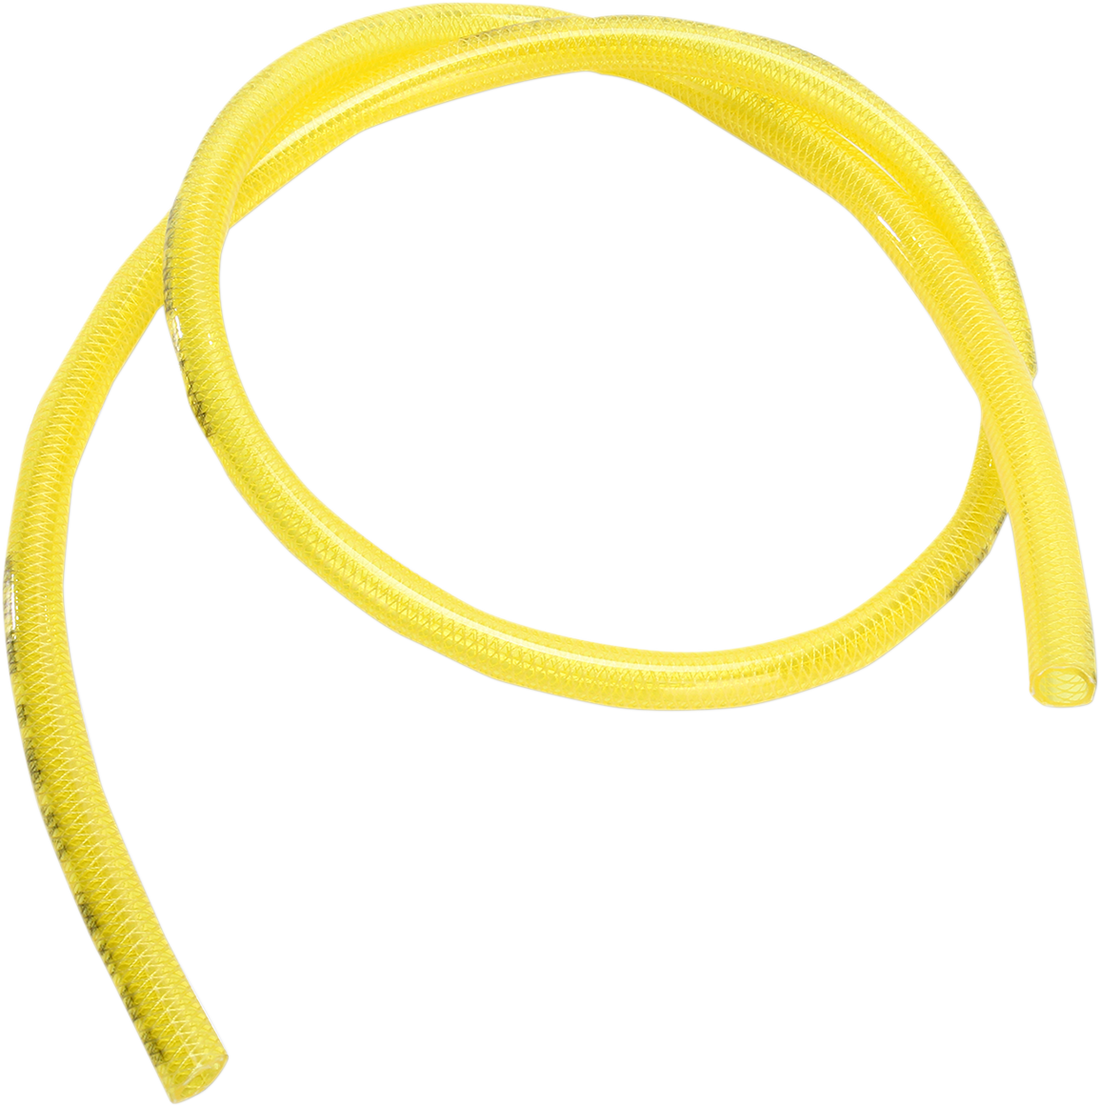 0706-0285 - HELIX High-Pressure Fuel Line - Yellow - 5/16" - 3' 516-4734